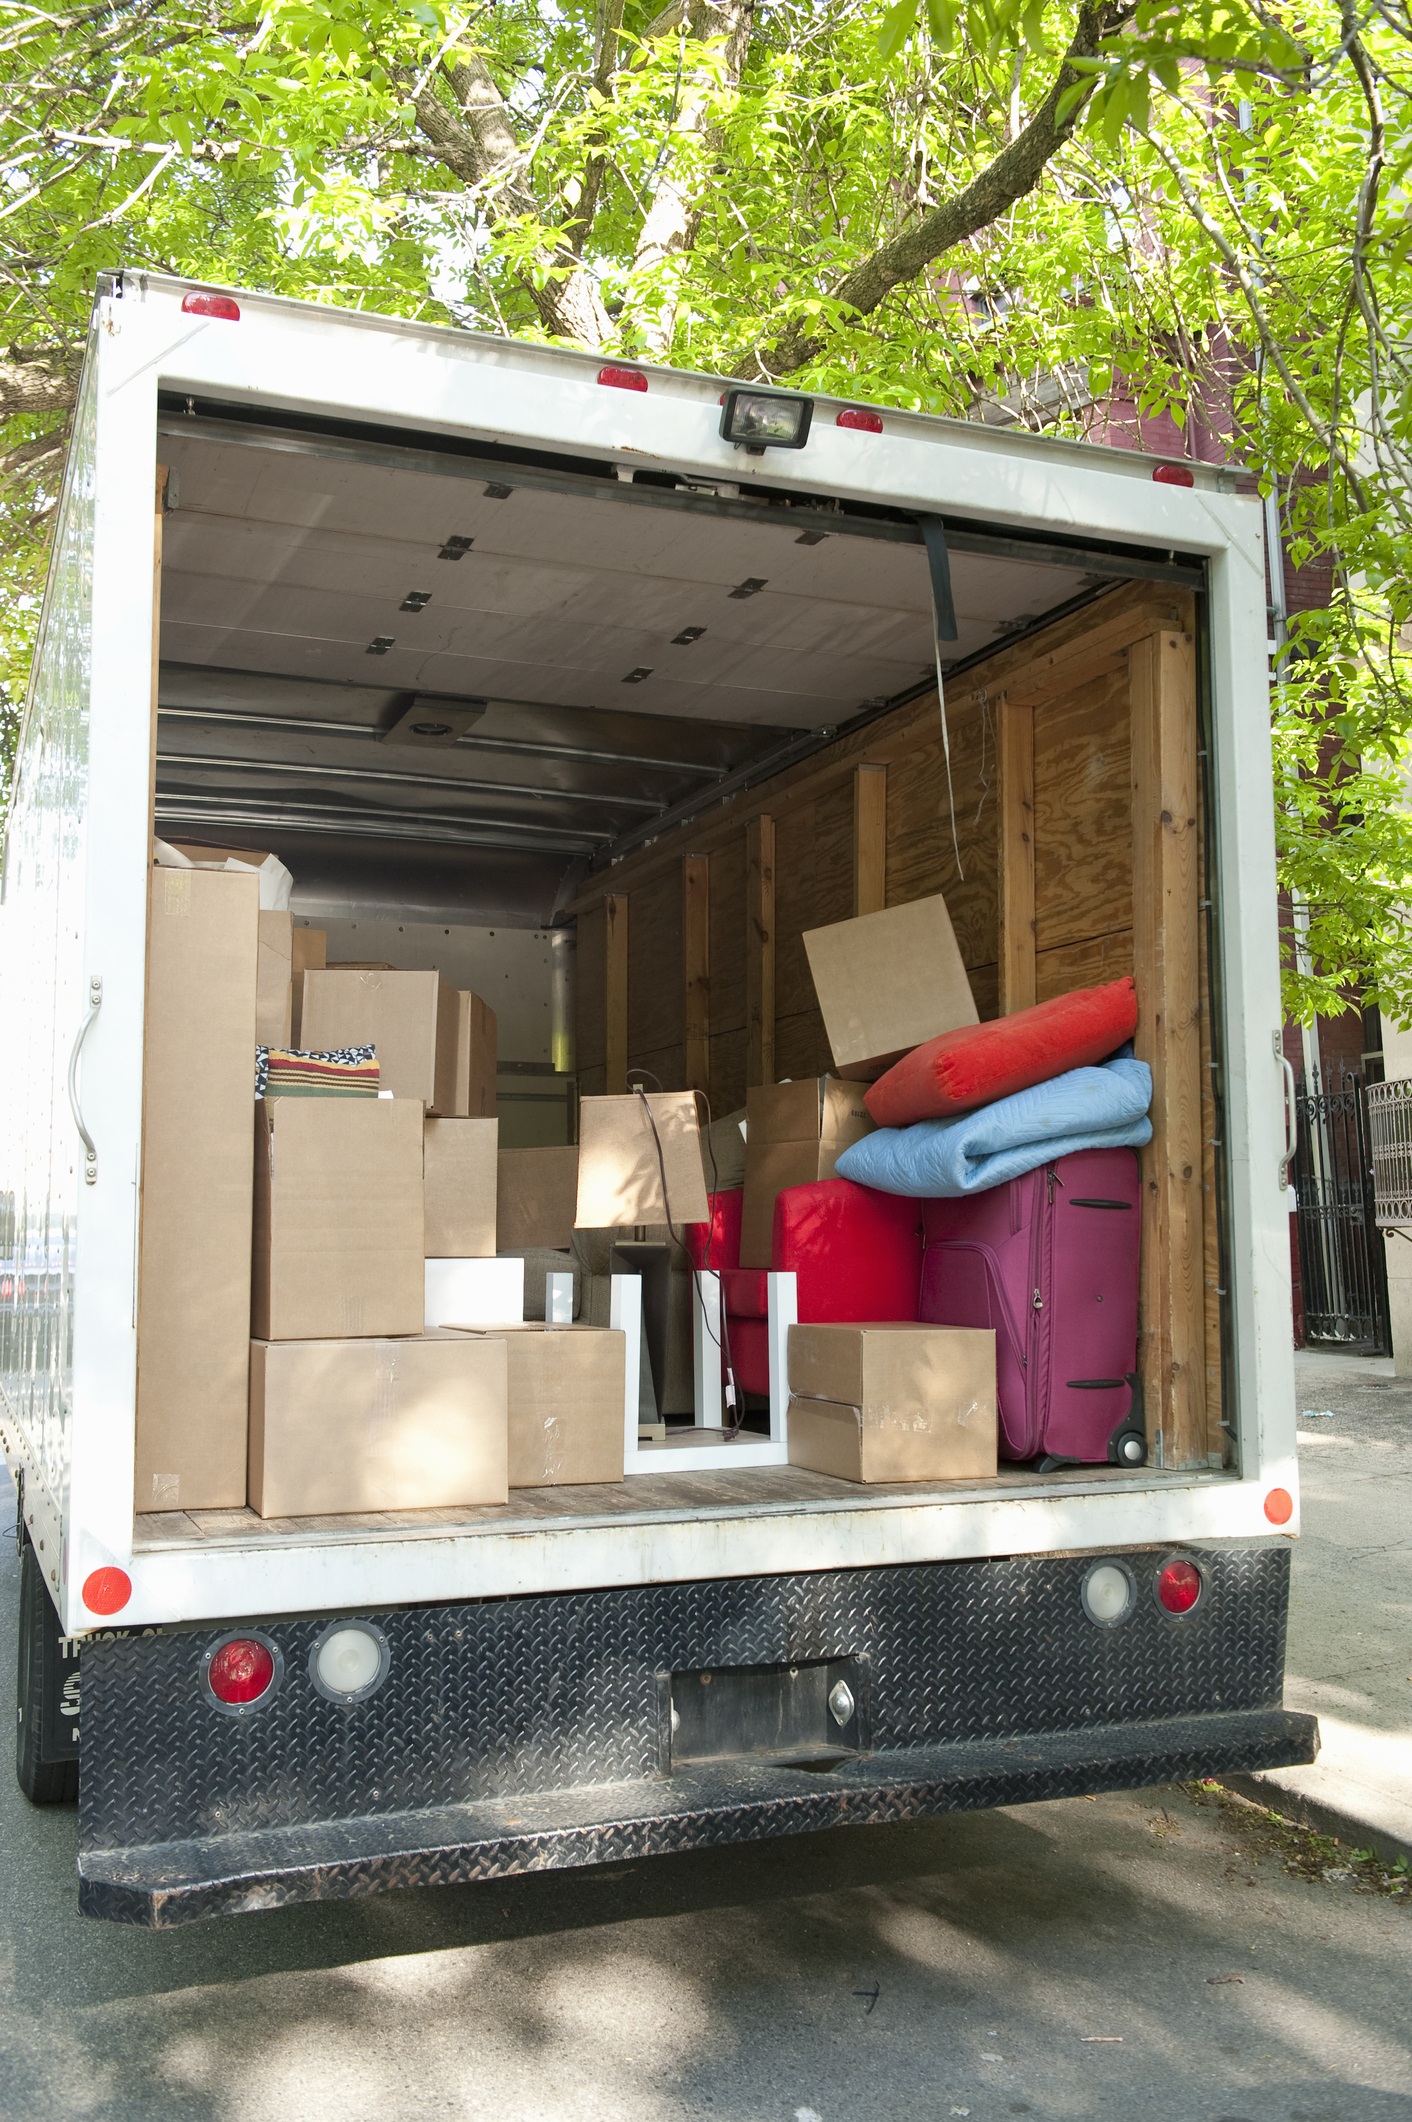 A moving truck filled with items